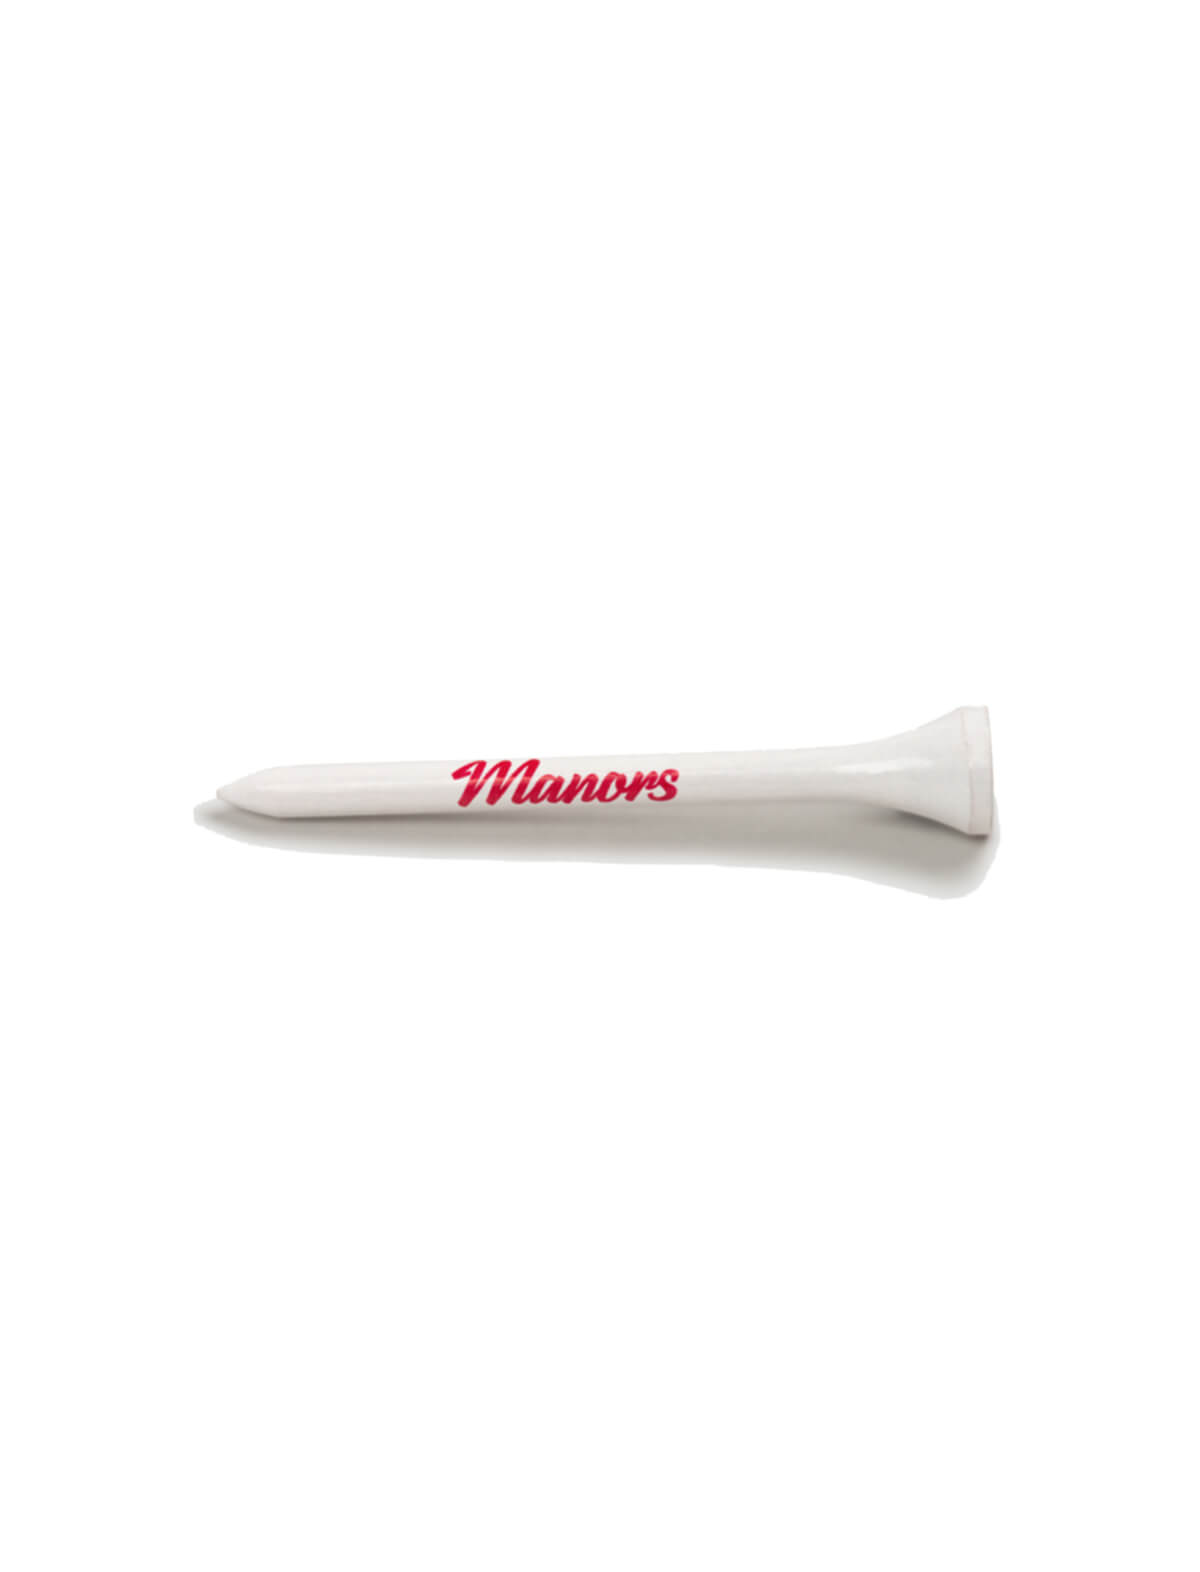 Manors Golf Branded Tees in White